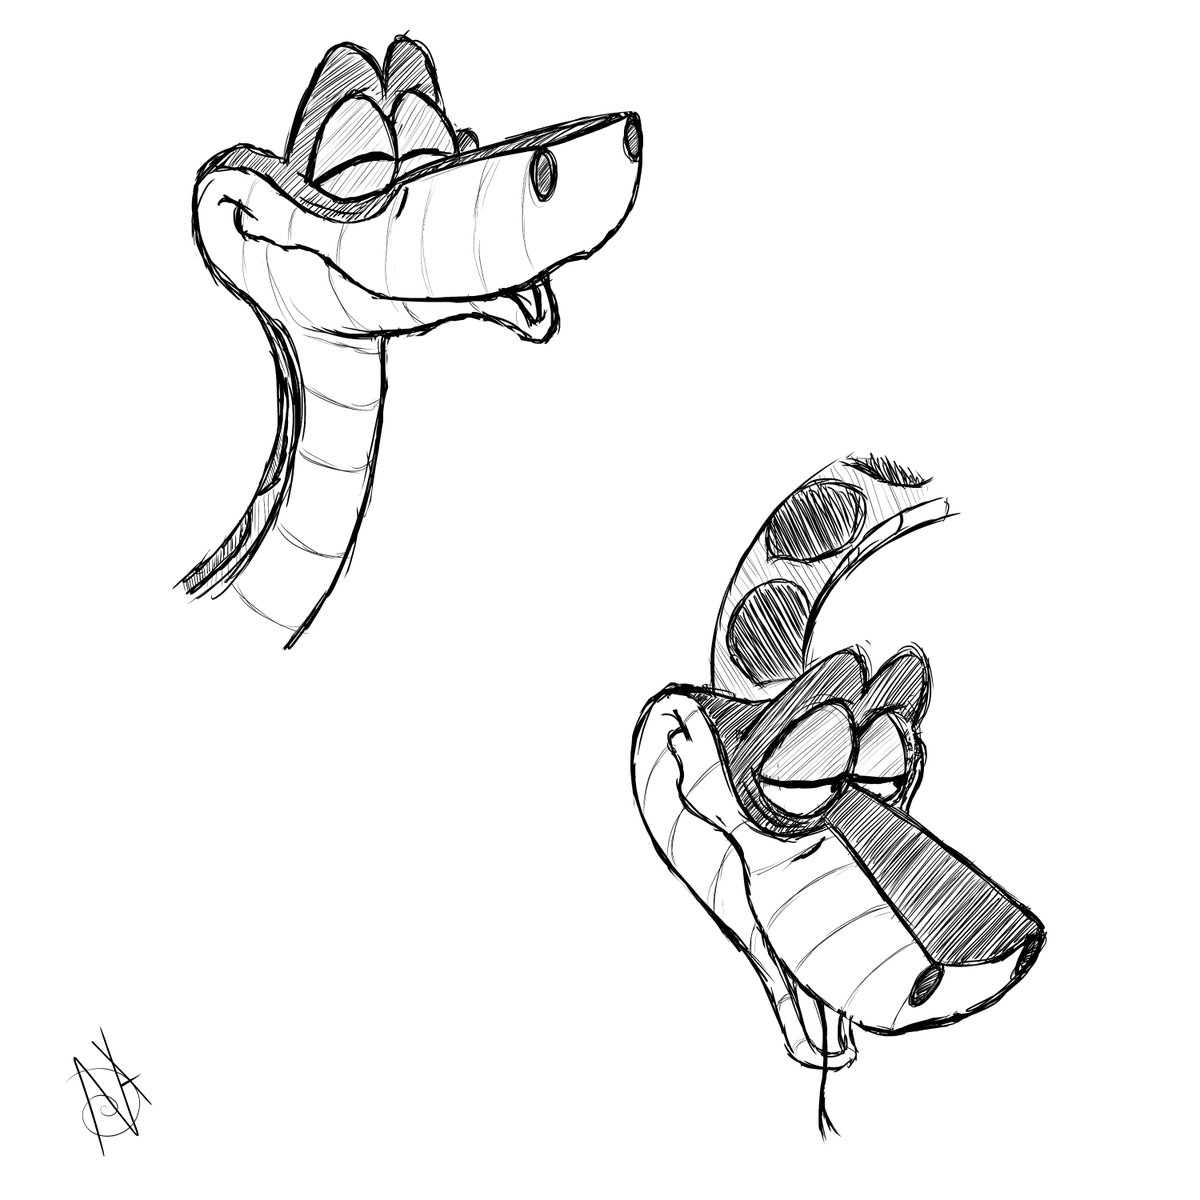 Hope everyone's having a lovely Monday today! Just a couple quick little Kaa scribblings from the other night. hehe